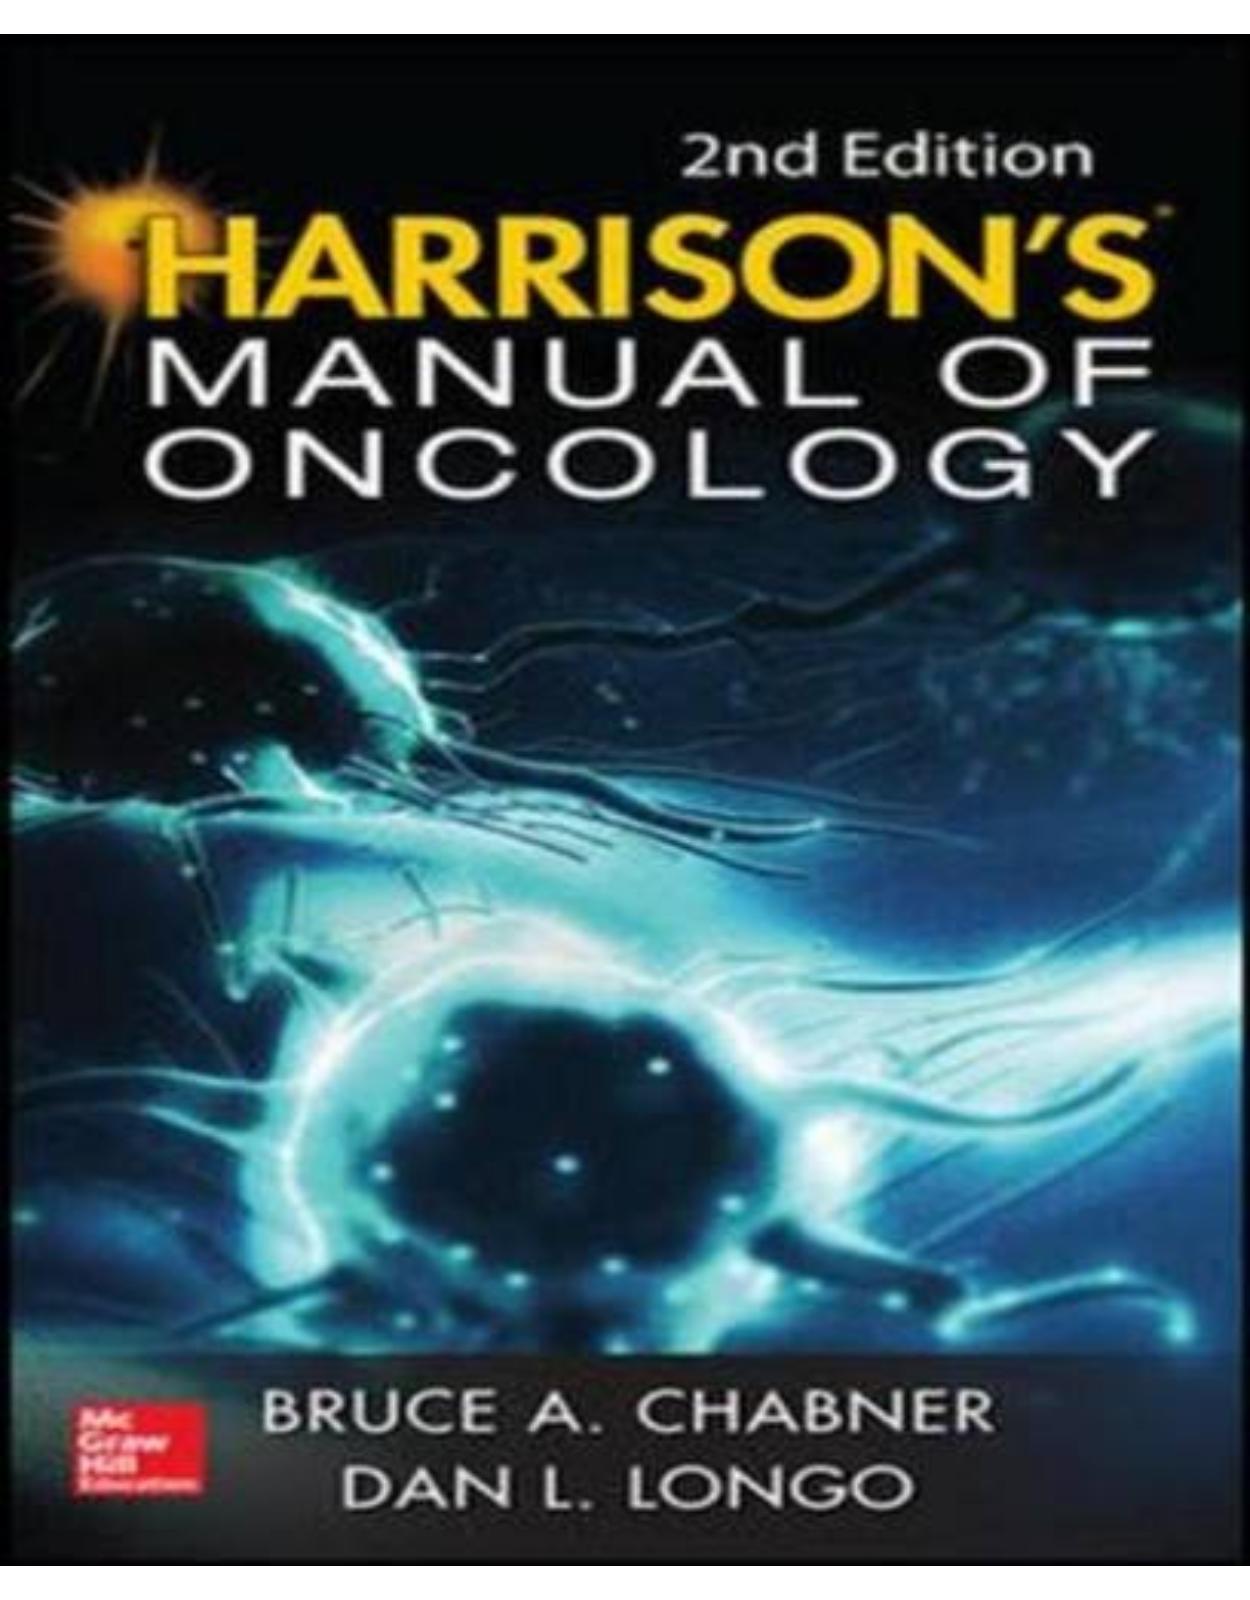 Harrisons Manual of Oncology 